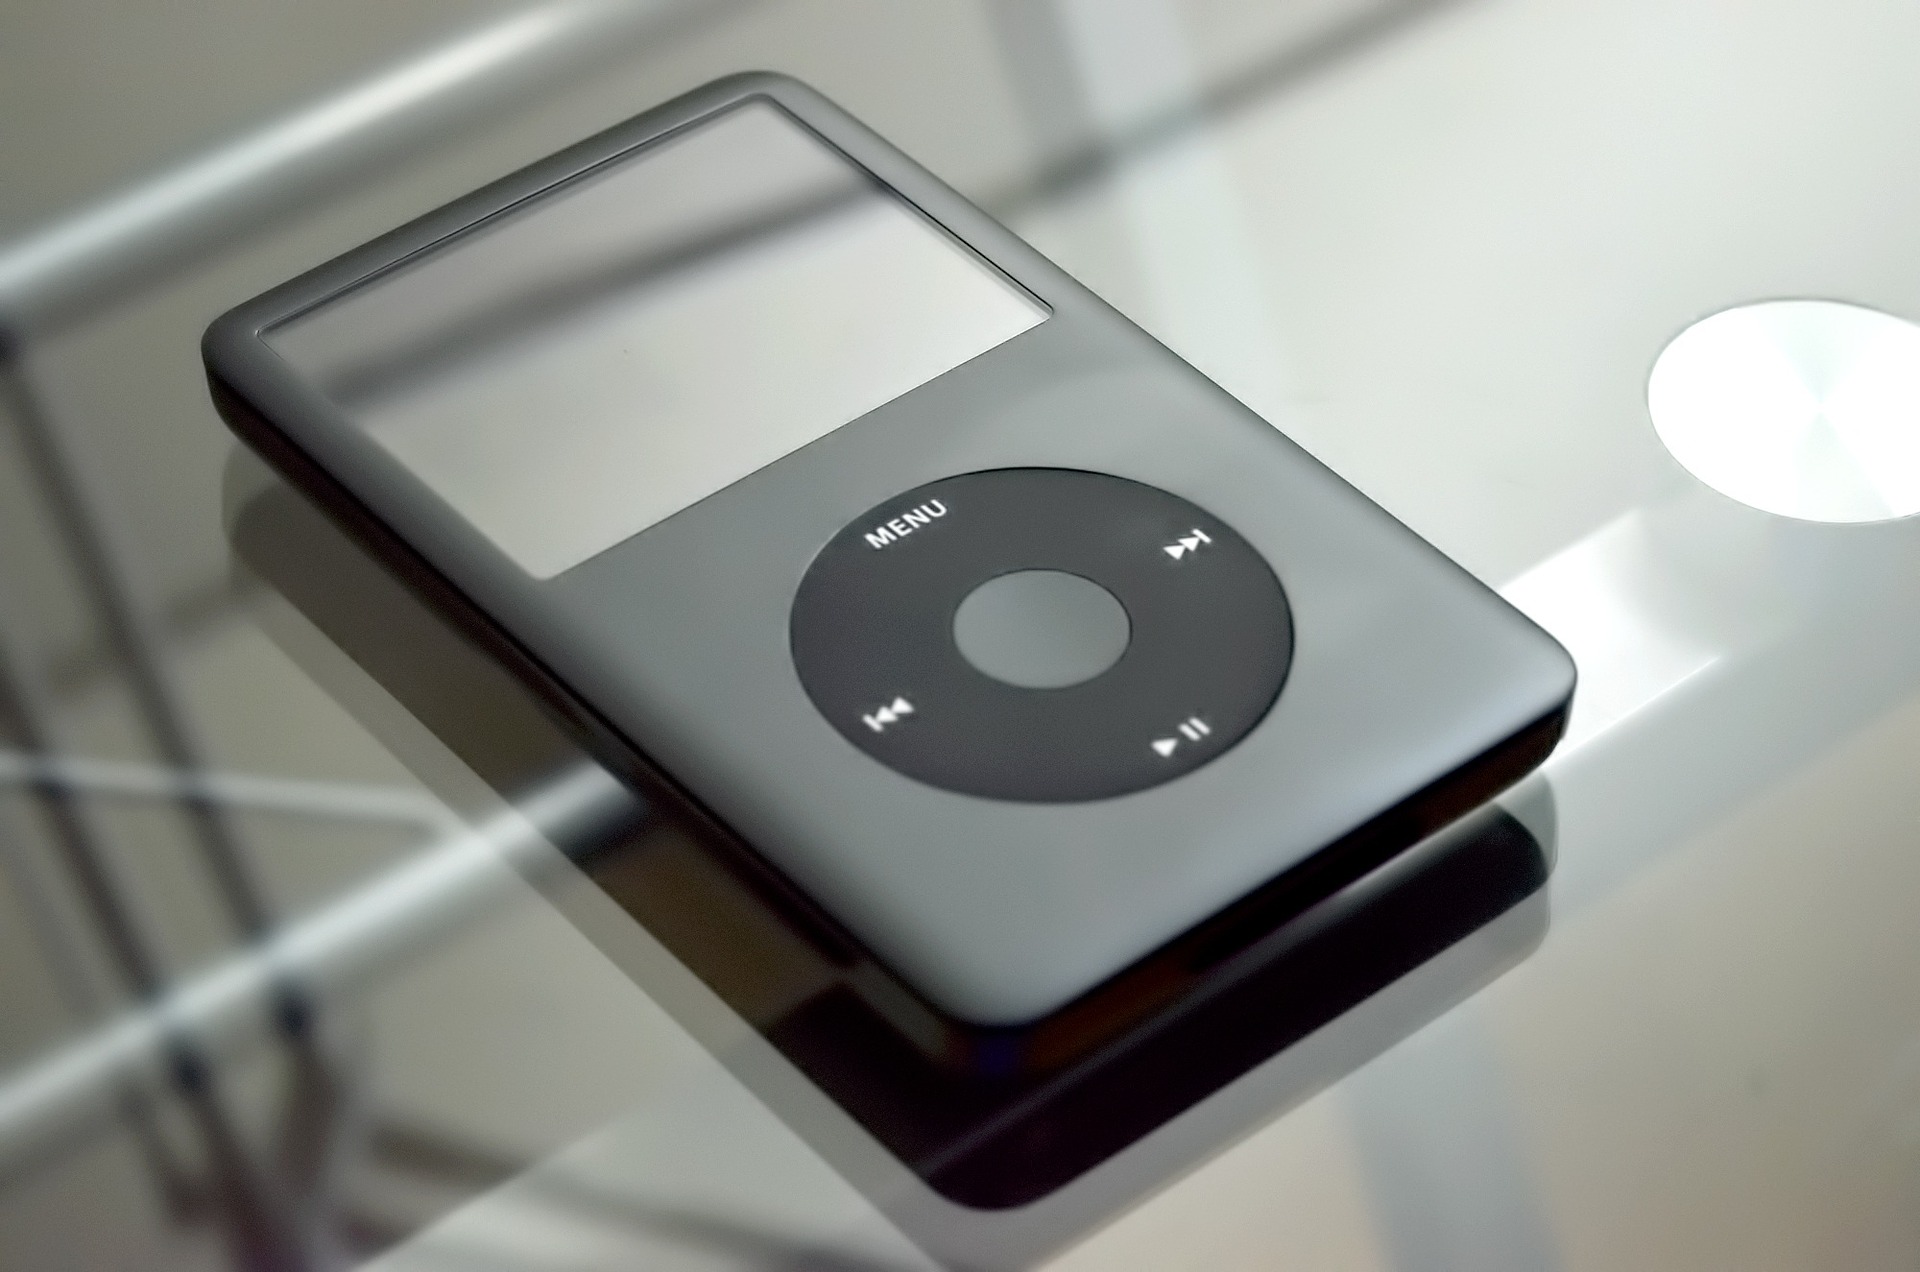 iPod is officially dead